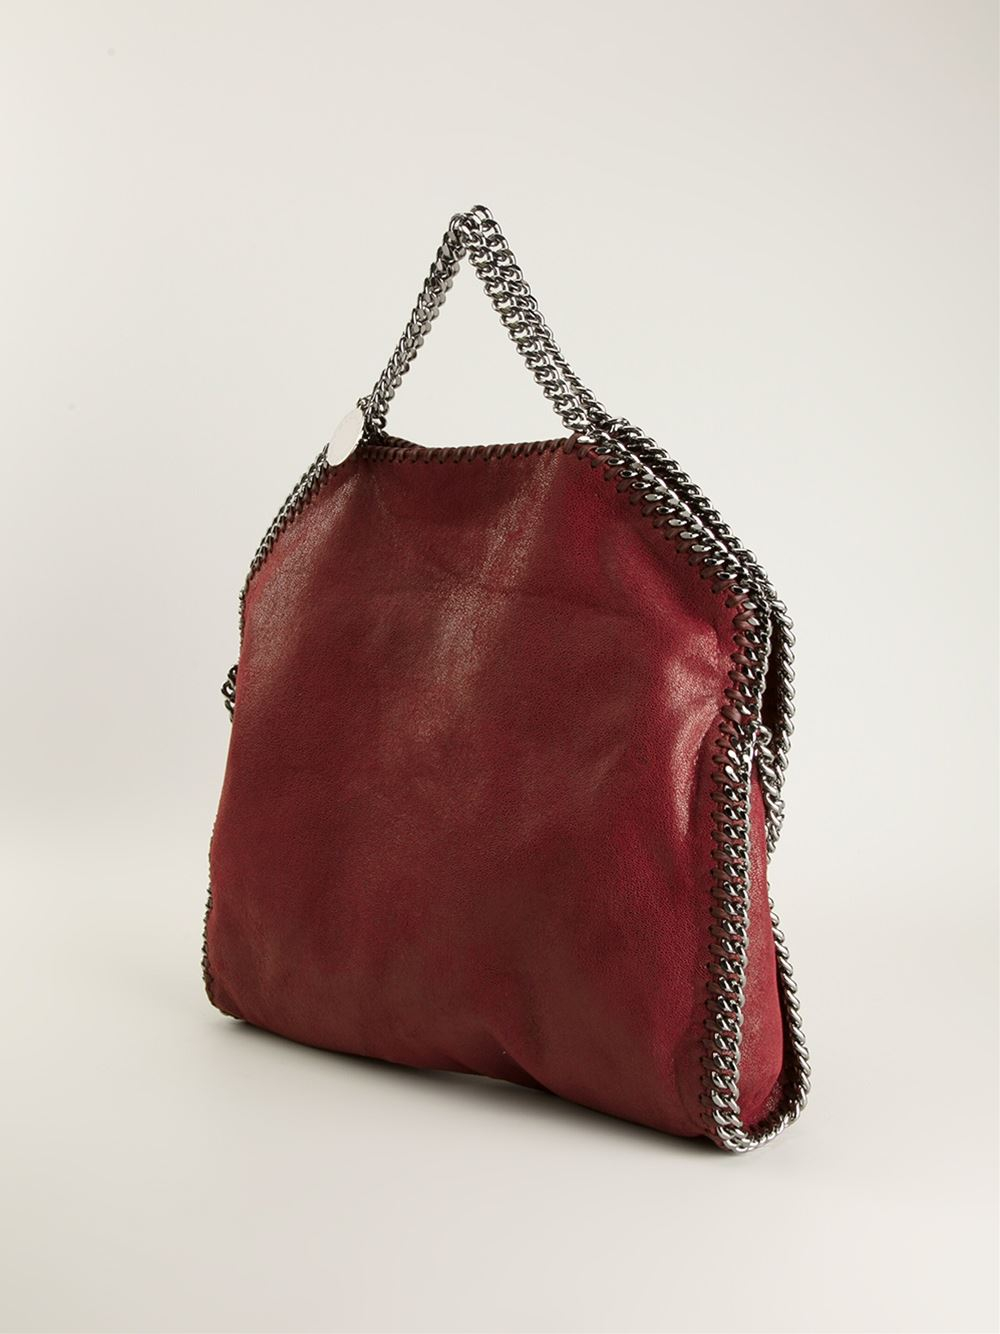 Stella McCartney 'falabella Shaggy Deer' Fold Over Tote in Red - Lyst